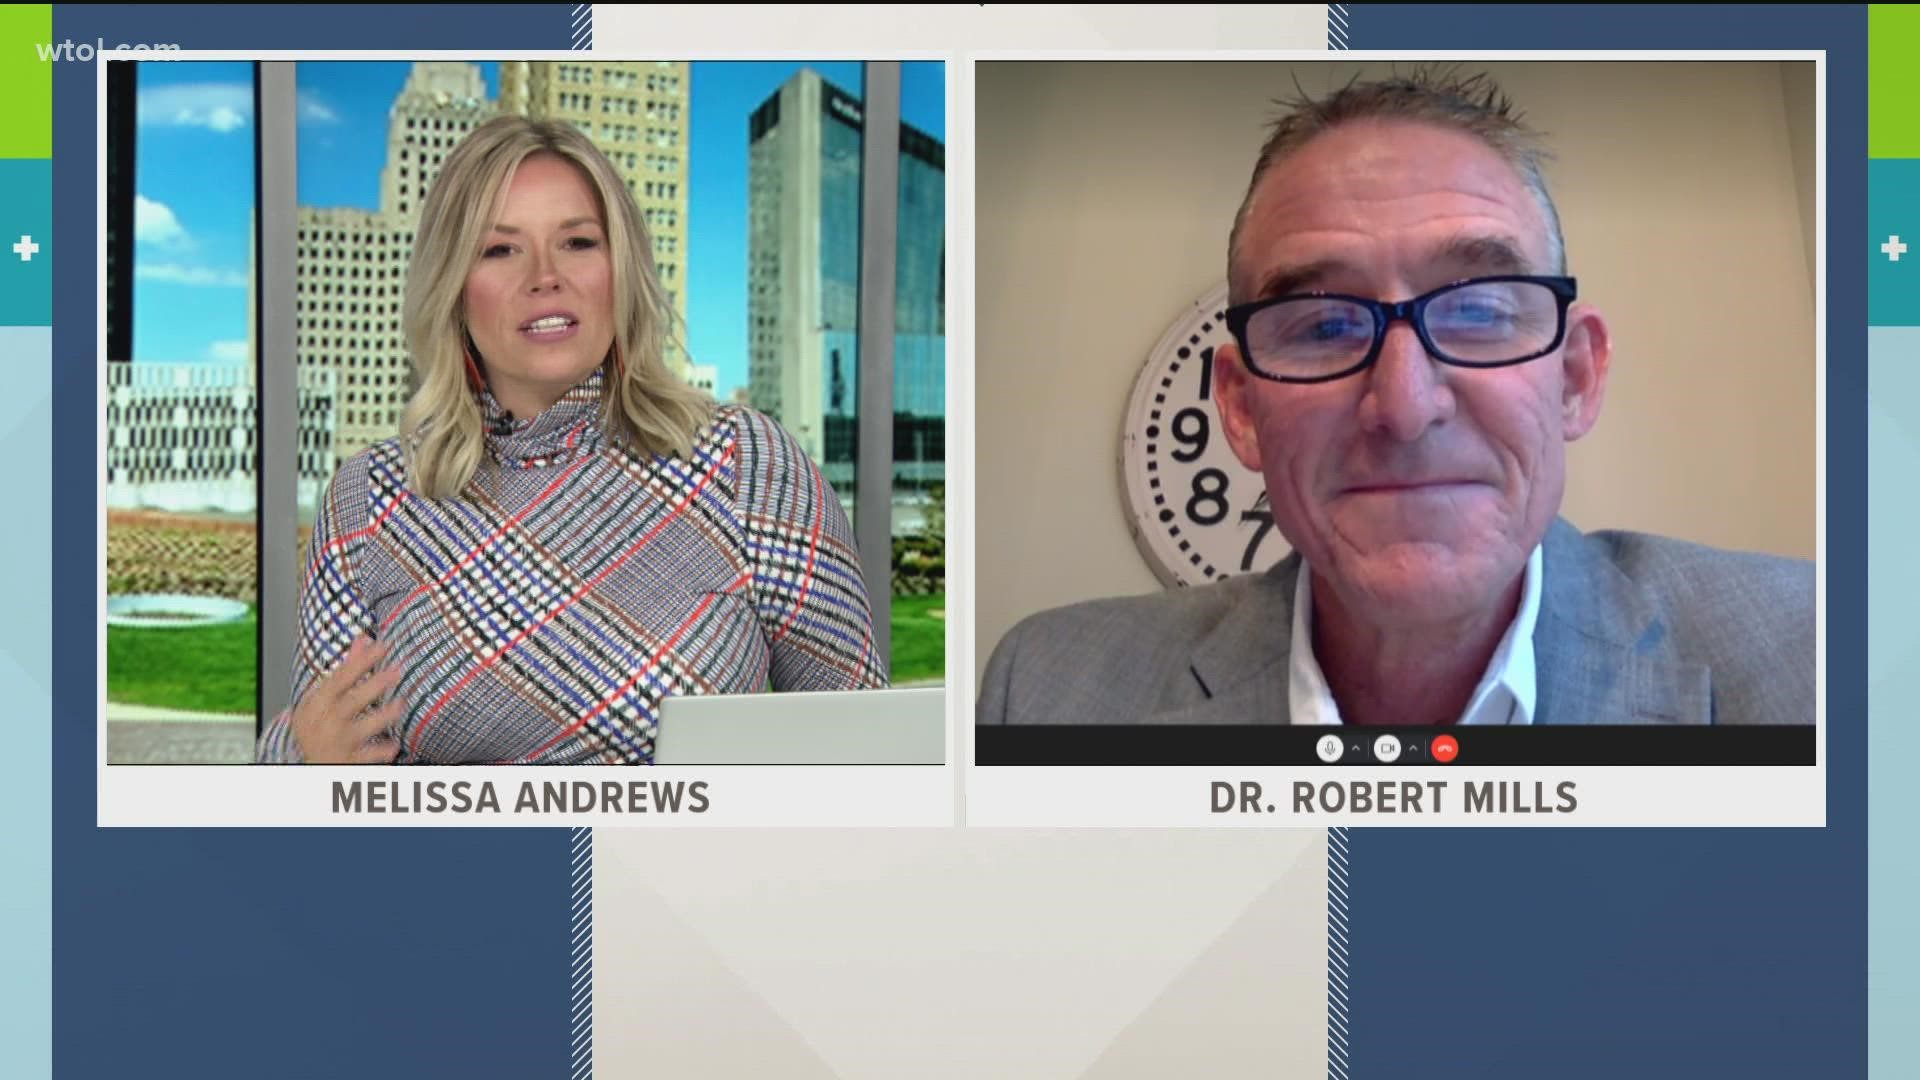 We've heard in recent weeks stories of hospitals filling up with COVID-19 patients who are younger than what they had been dealing with. Dr. Robert Mills explains.